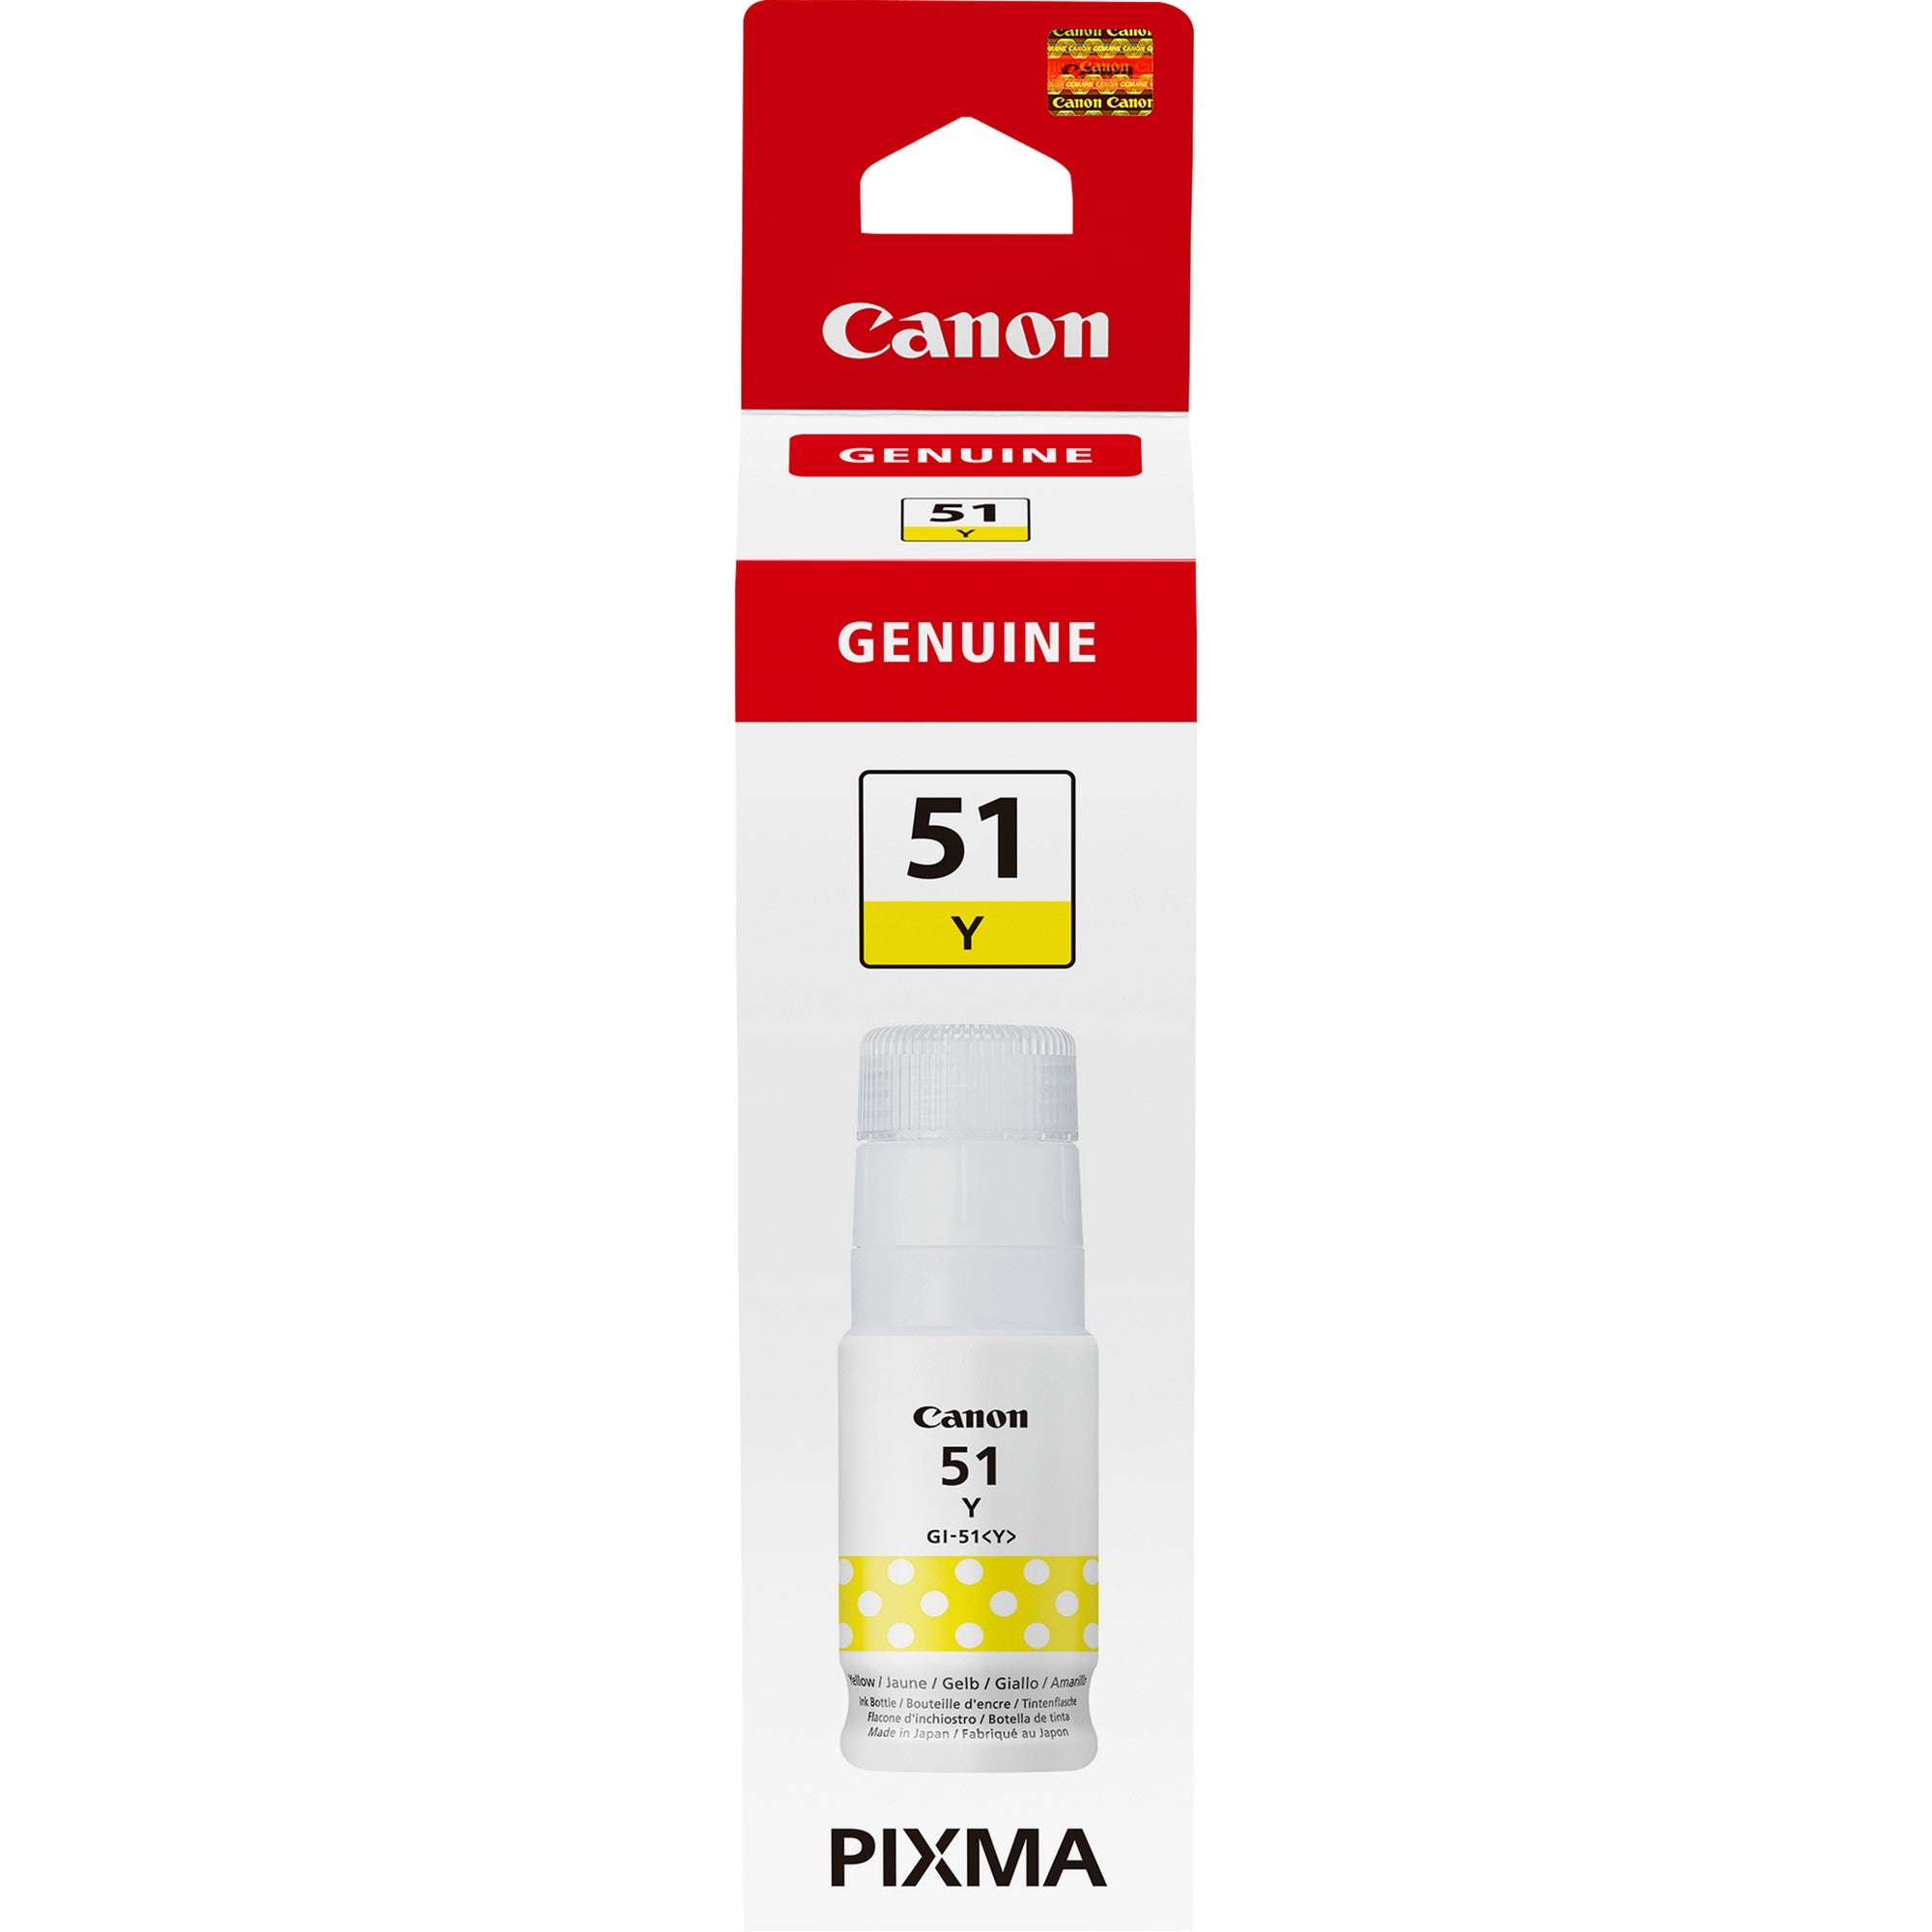 Canon 4548C001/GI-51Y Ink bottle yellow, 7.7K pages 70ml for Canon Pixma G 1520/1530